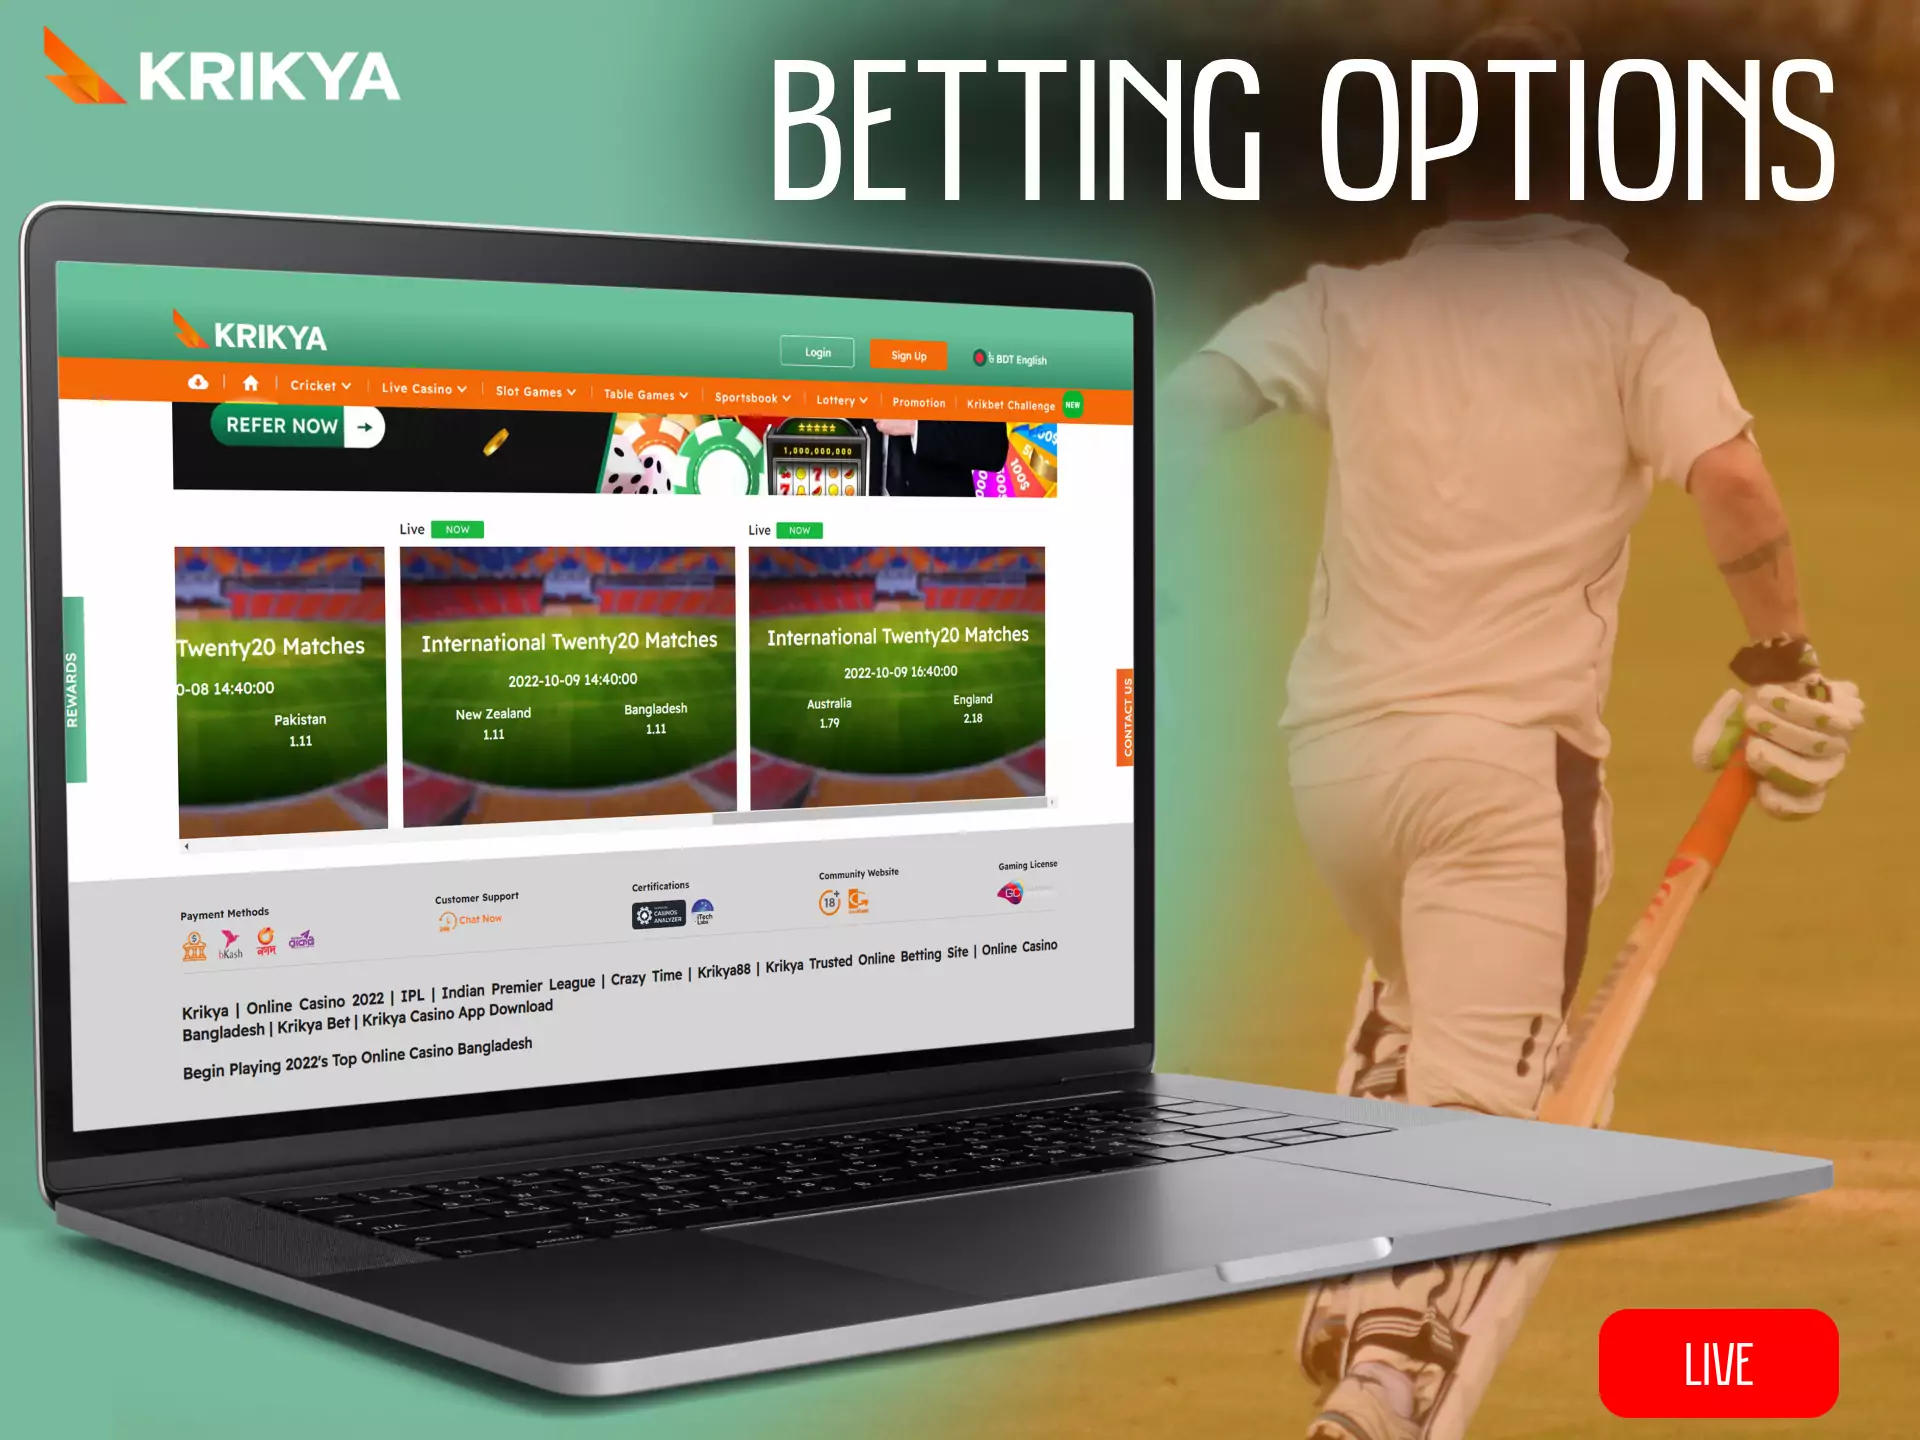 In Krikya, try different betting options for various sporting events.